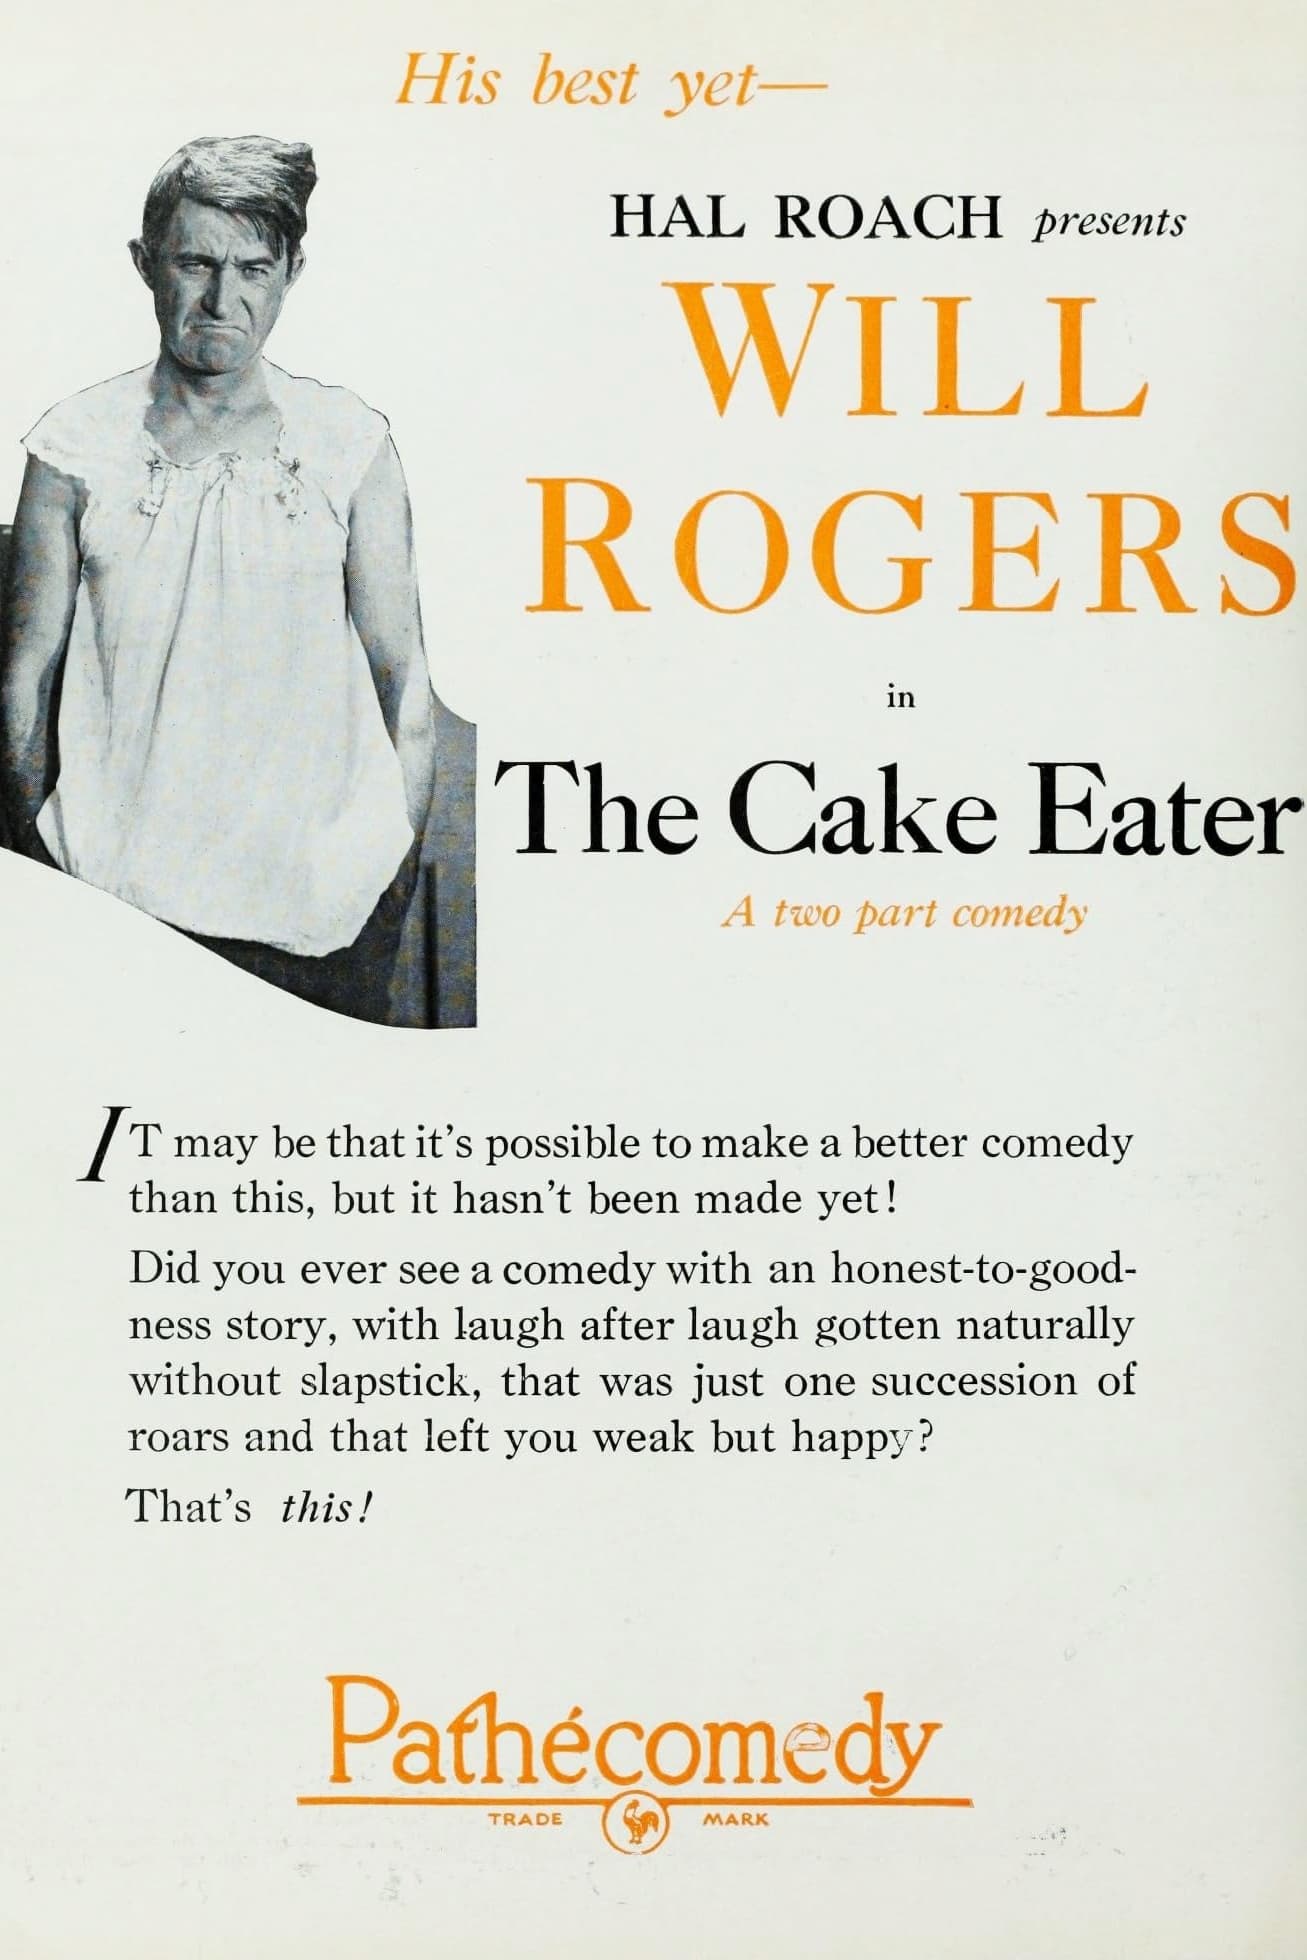 The Cake Eater